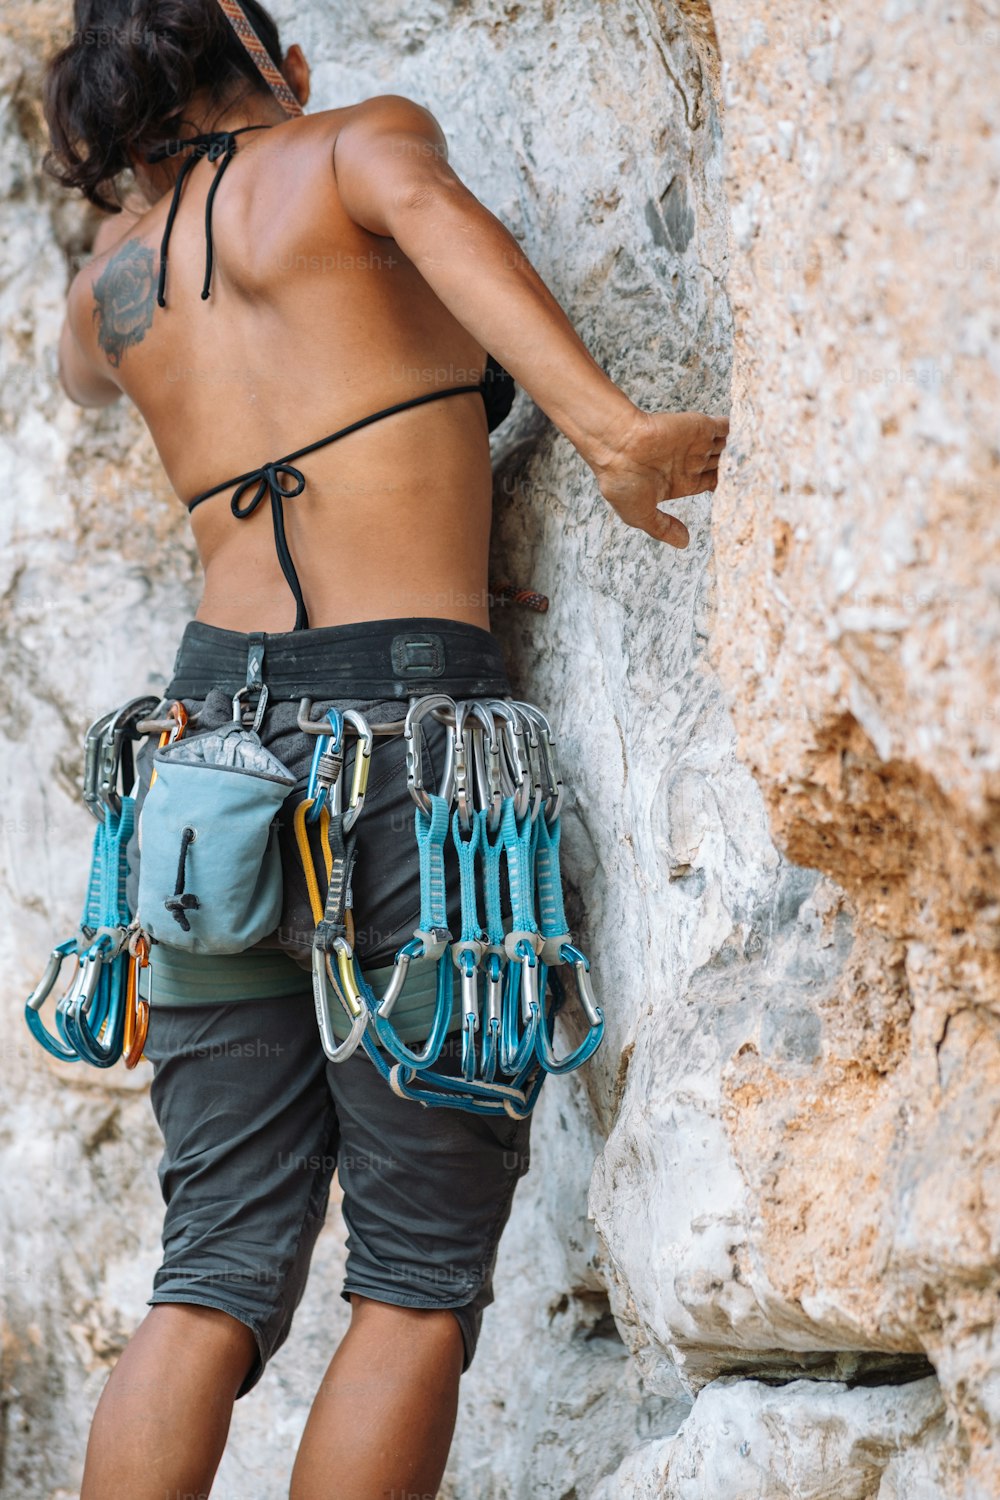 A woman climbing up the side of a rock photo – Deportes Image on Unsplash